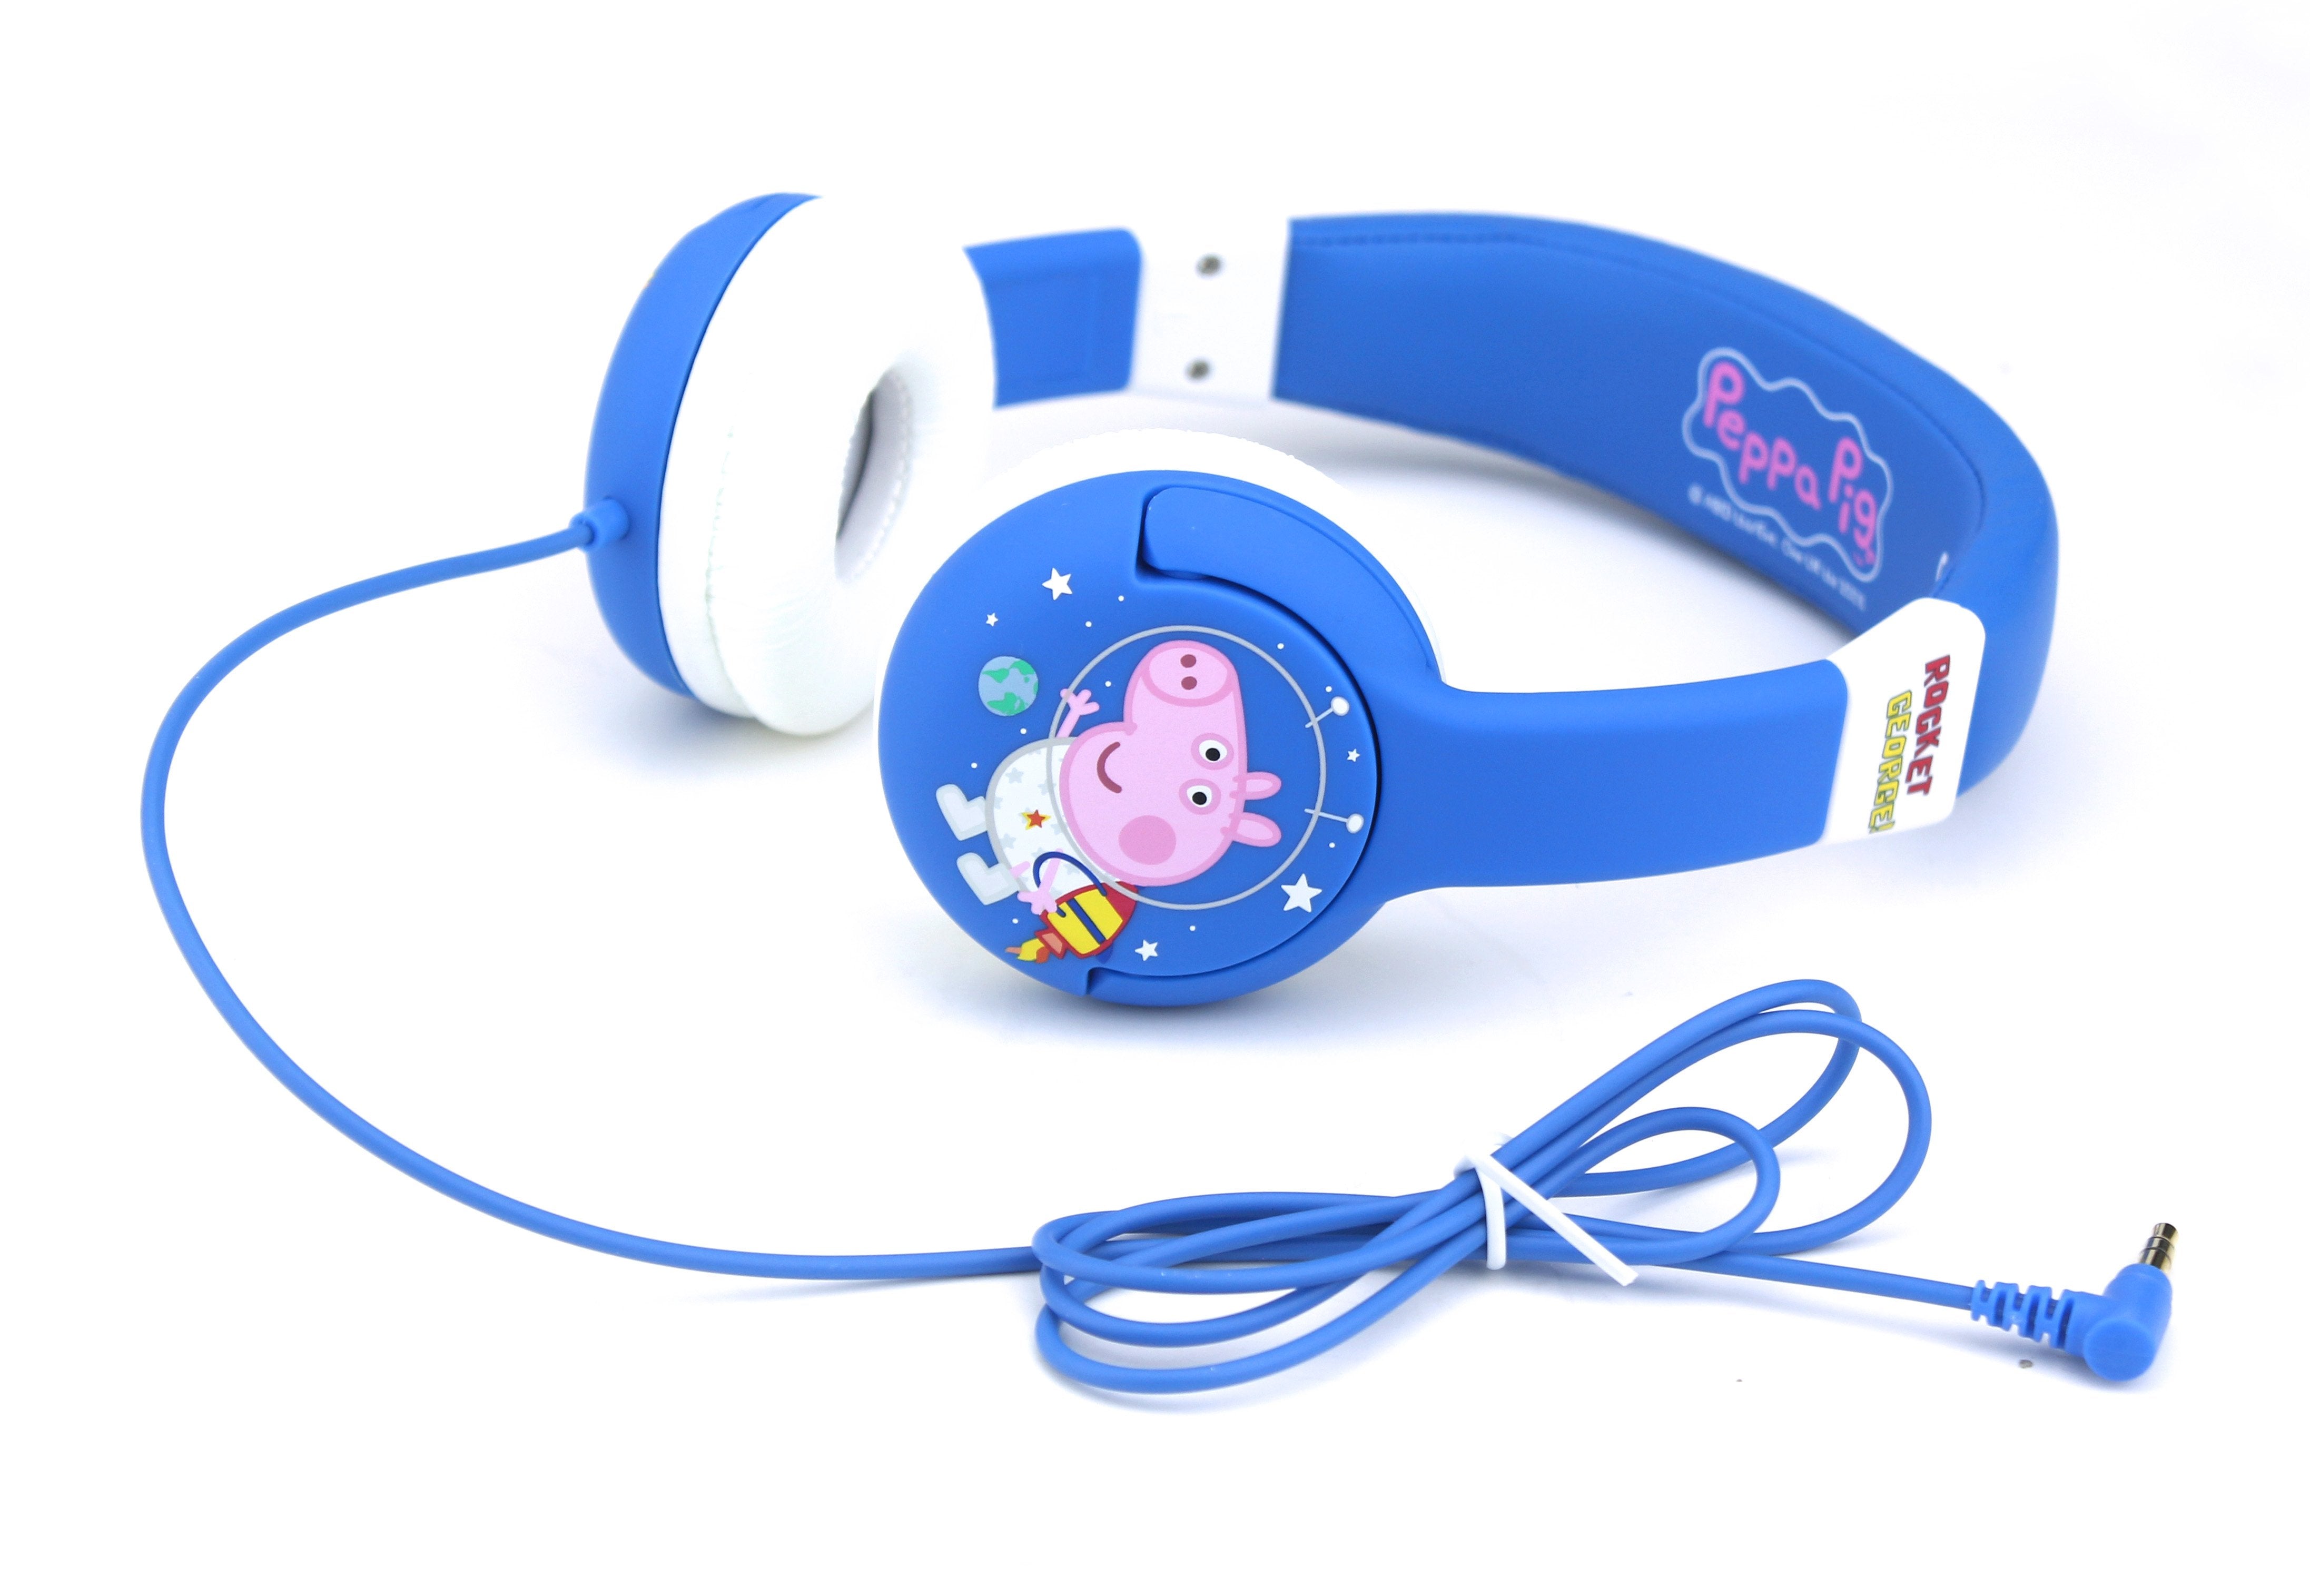 OTL Peppa OnEar Wired Headphone - Safe Volume Limiting @85dB, Foldable & Adjustable, Superb Sound Quality,  Works w/ Smartphones, Tablets, Ninetendo Switch, Laptops & devices w/ 3.5mm port - George